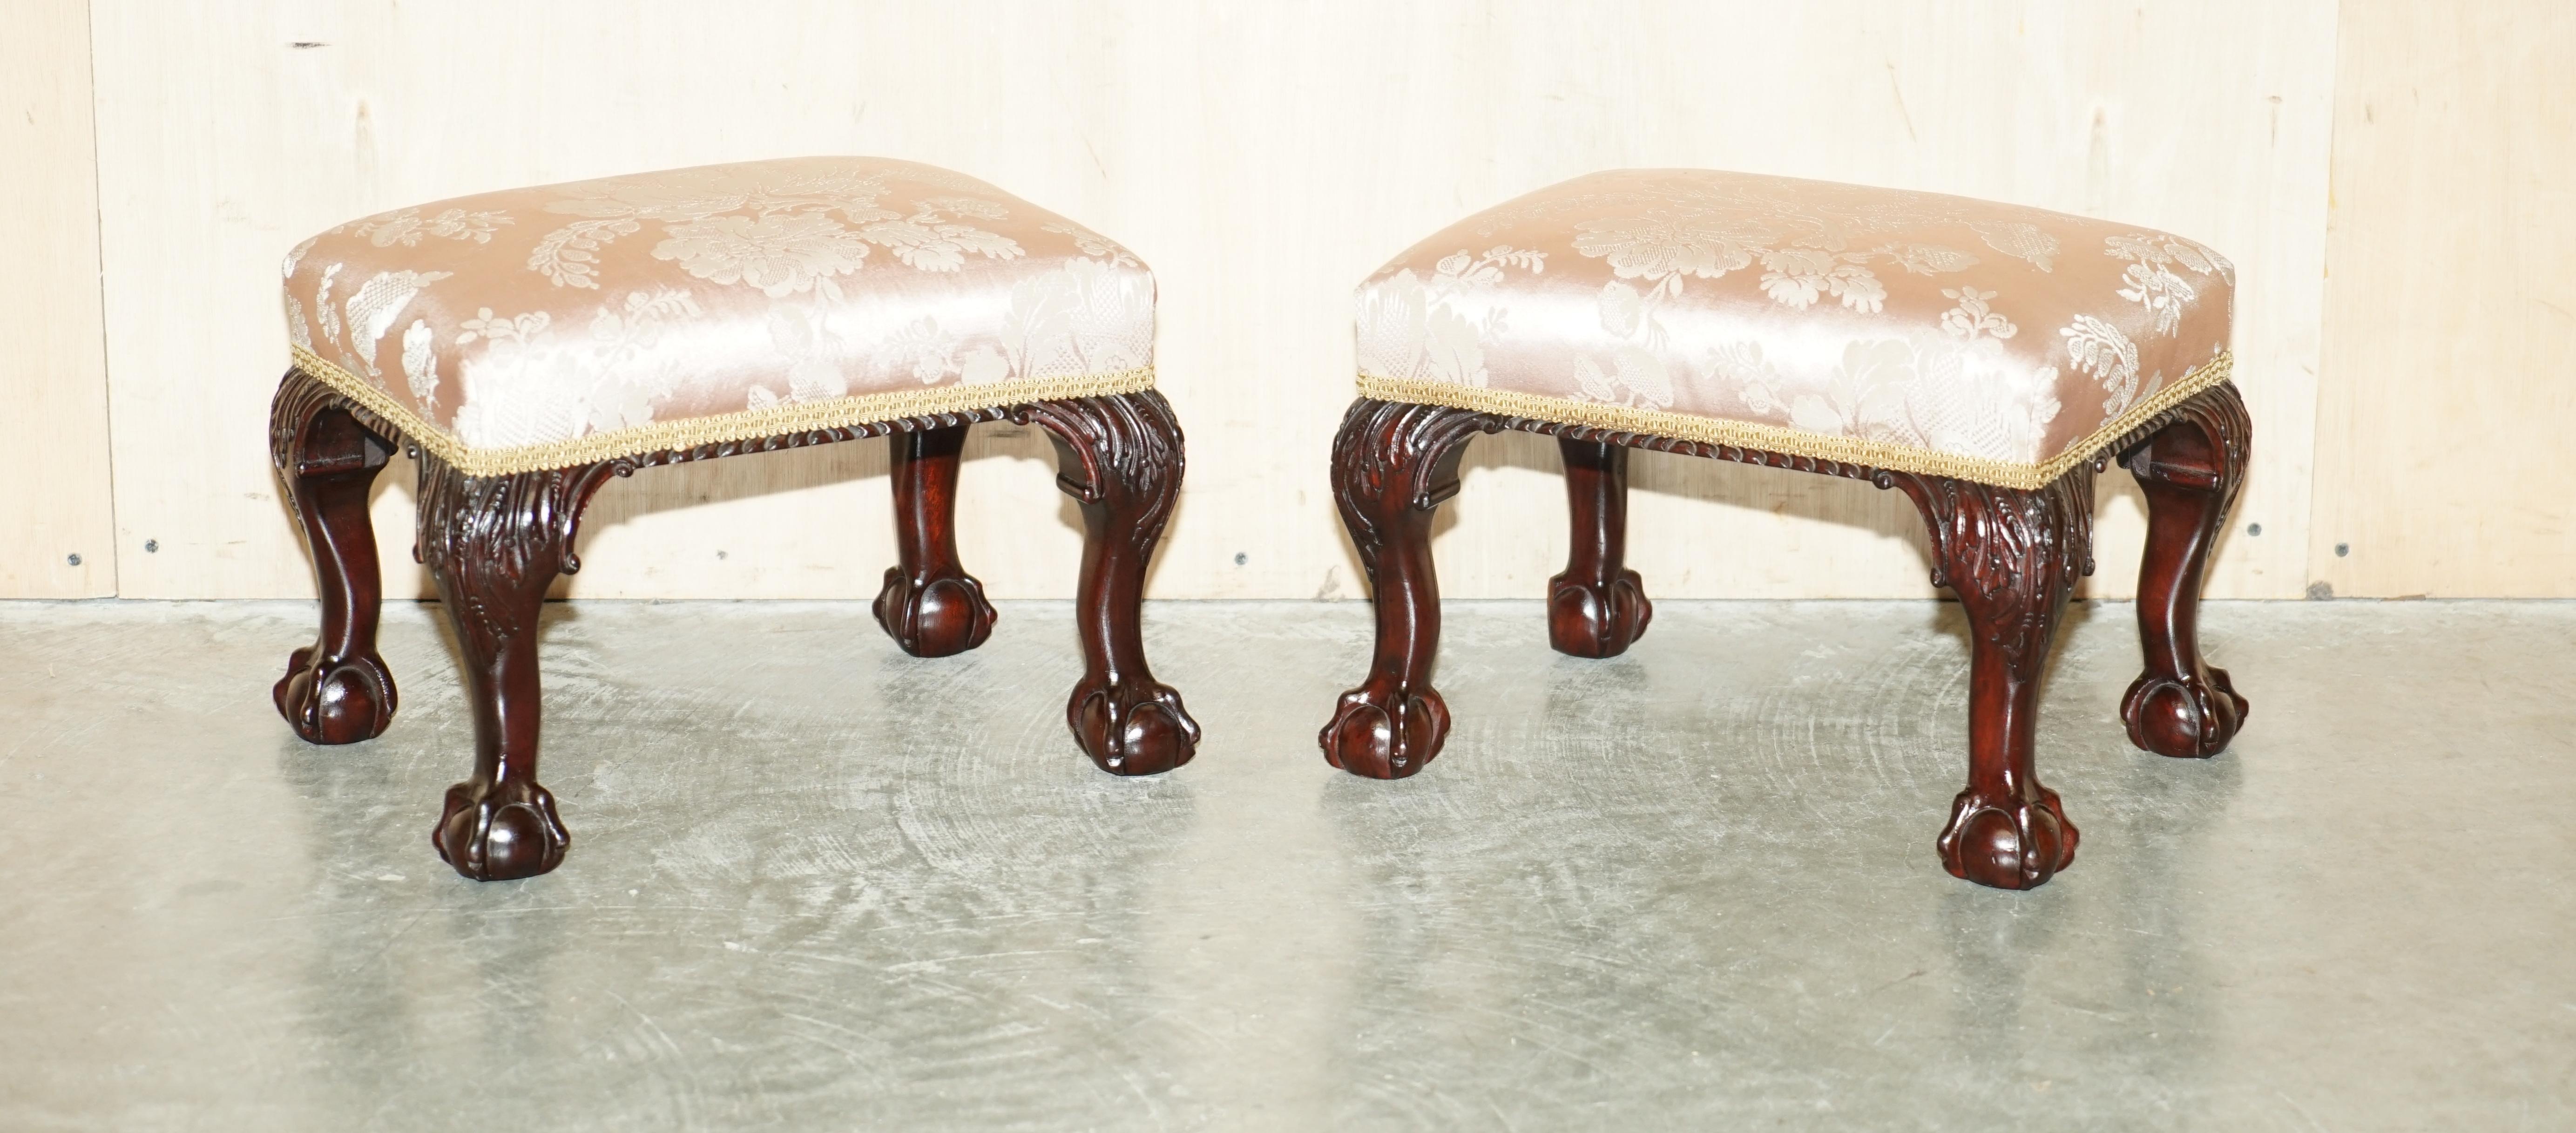 Royal House Antiques

Royal House Antiques is delighted to offer for sale this exquisite pair of Victorian hand carved Mahogany, Claw & Ball feet, small footstools with floral upholstery 

Please note the delivery fee listed is just a guide, it